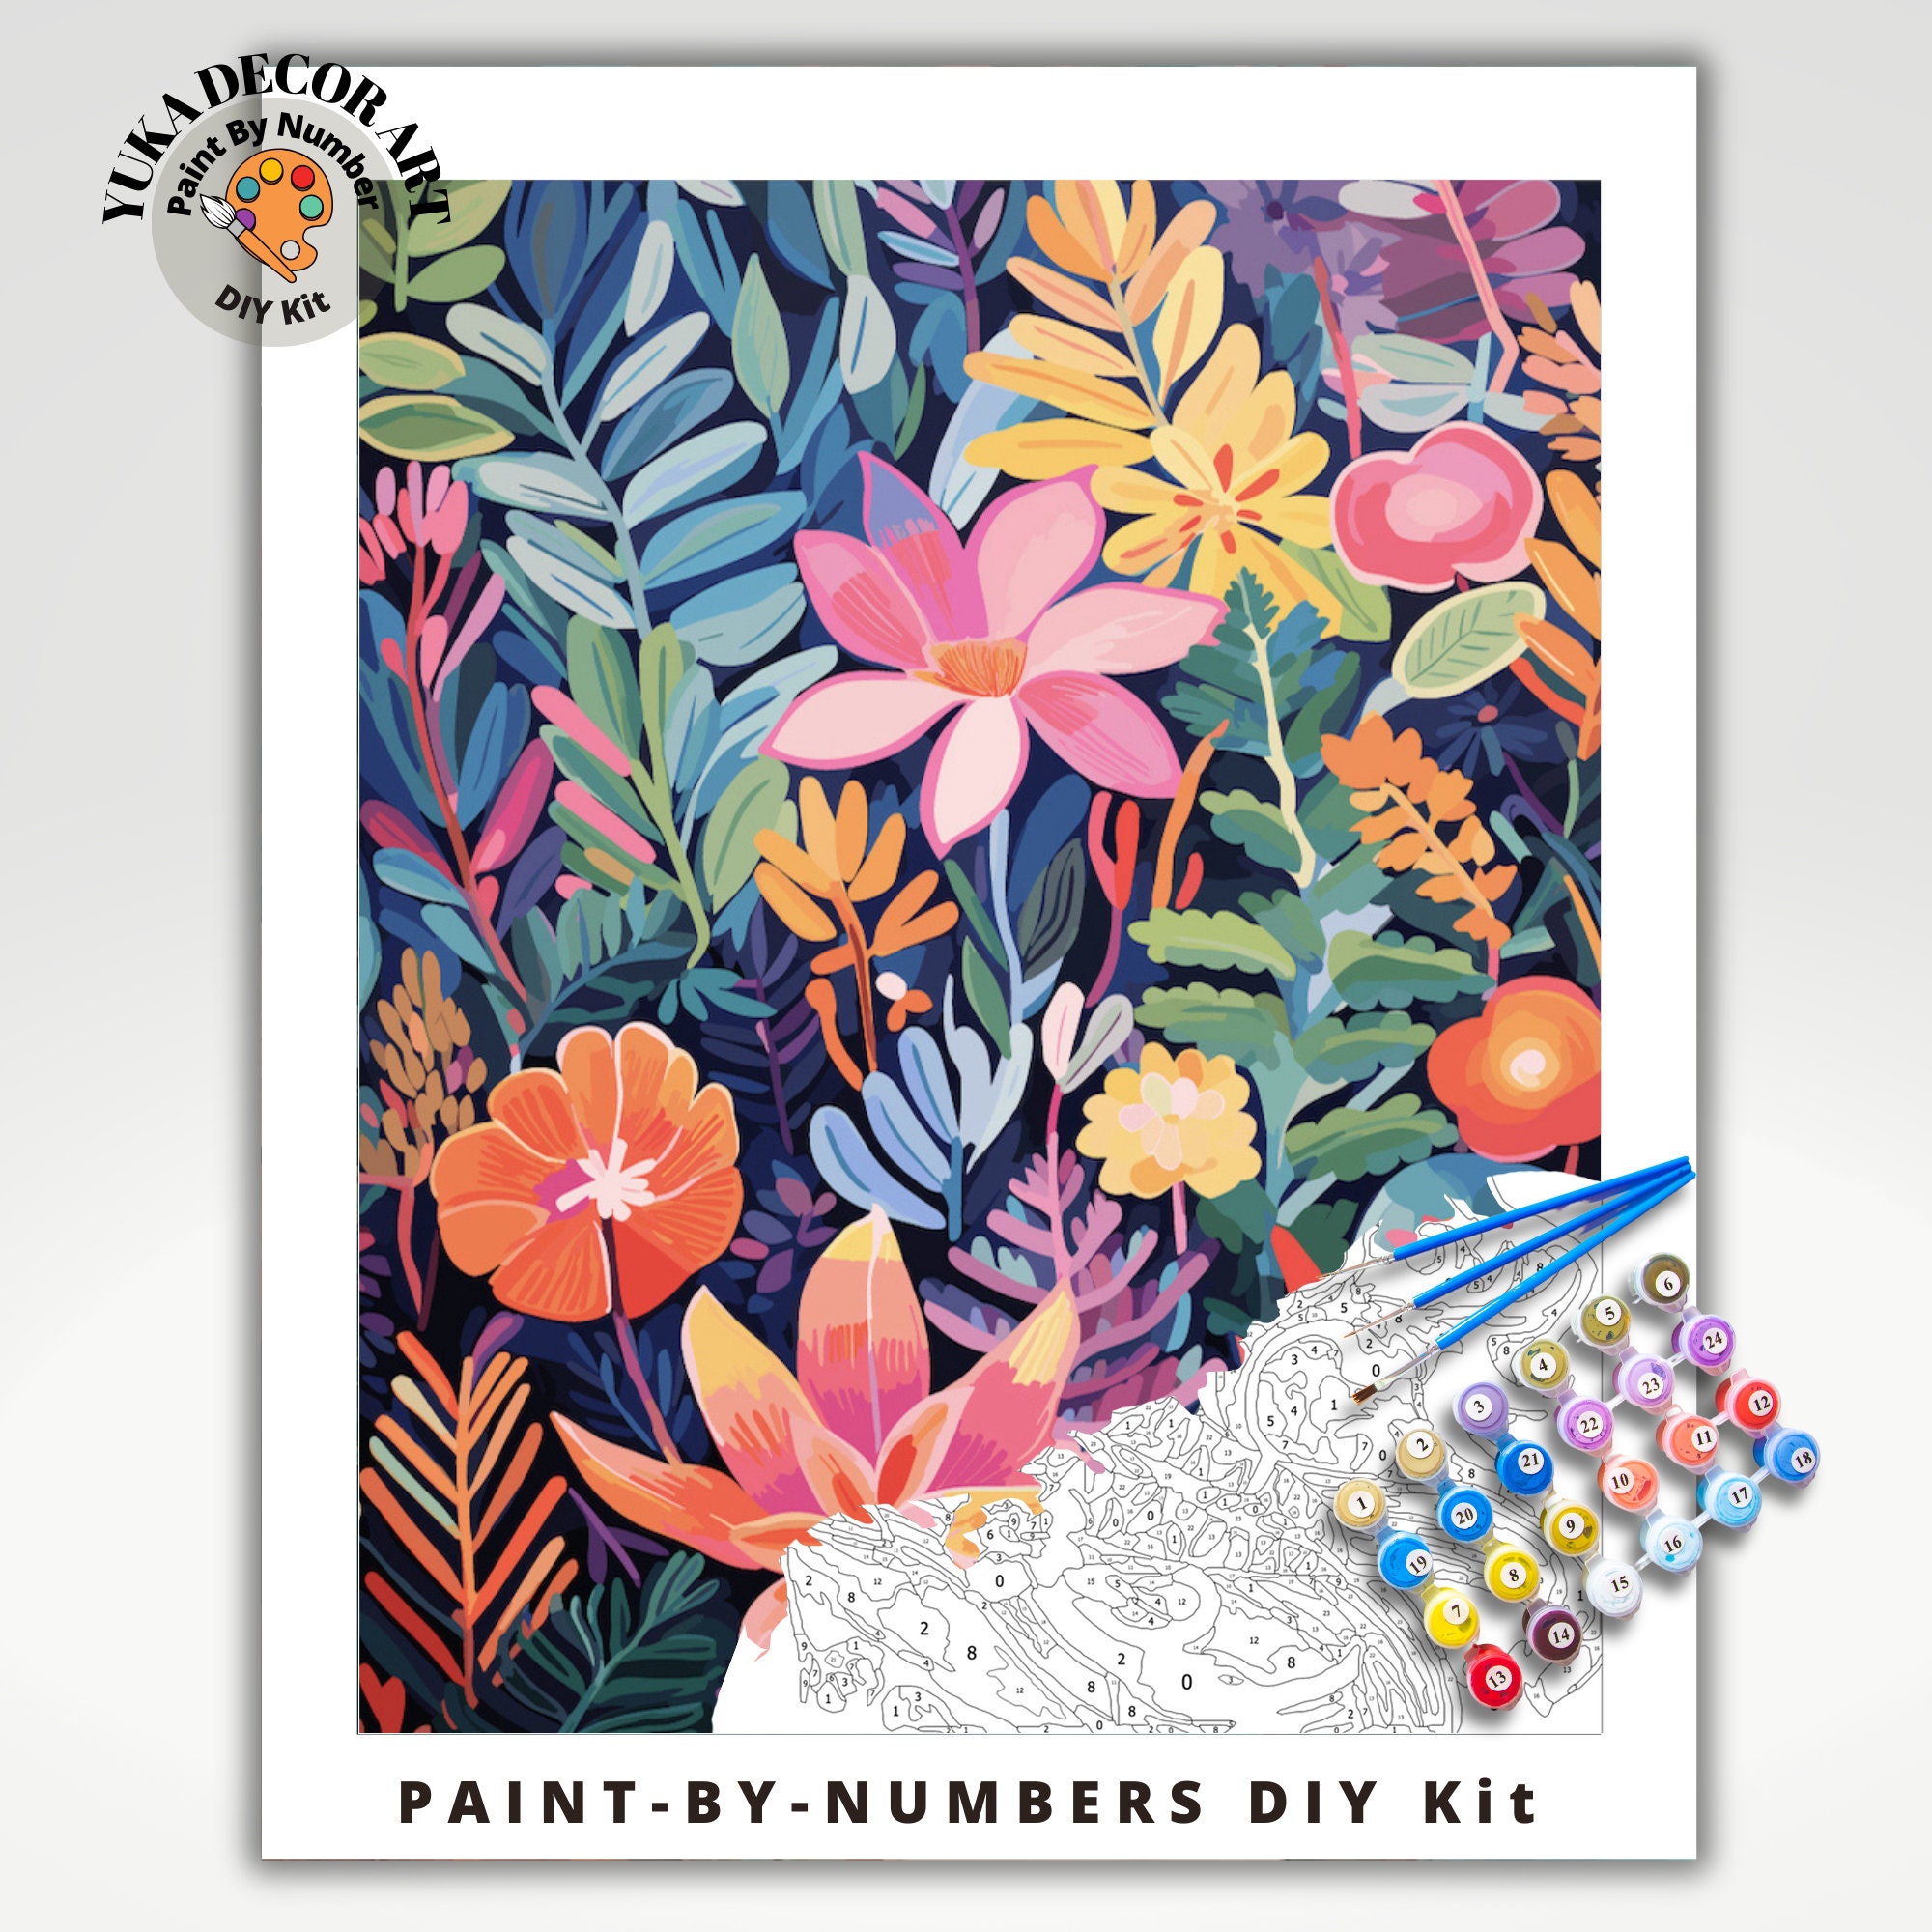 PIPISKY Paint by Numbers Kit for Adults Flowers,Flower Narcissus,Capture  The Wonderful Moments of Summer's Flower Sea Through Art,40x50cm,Without